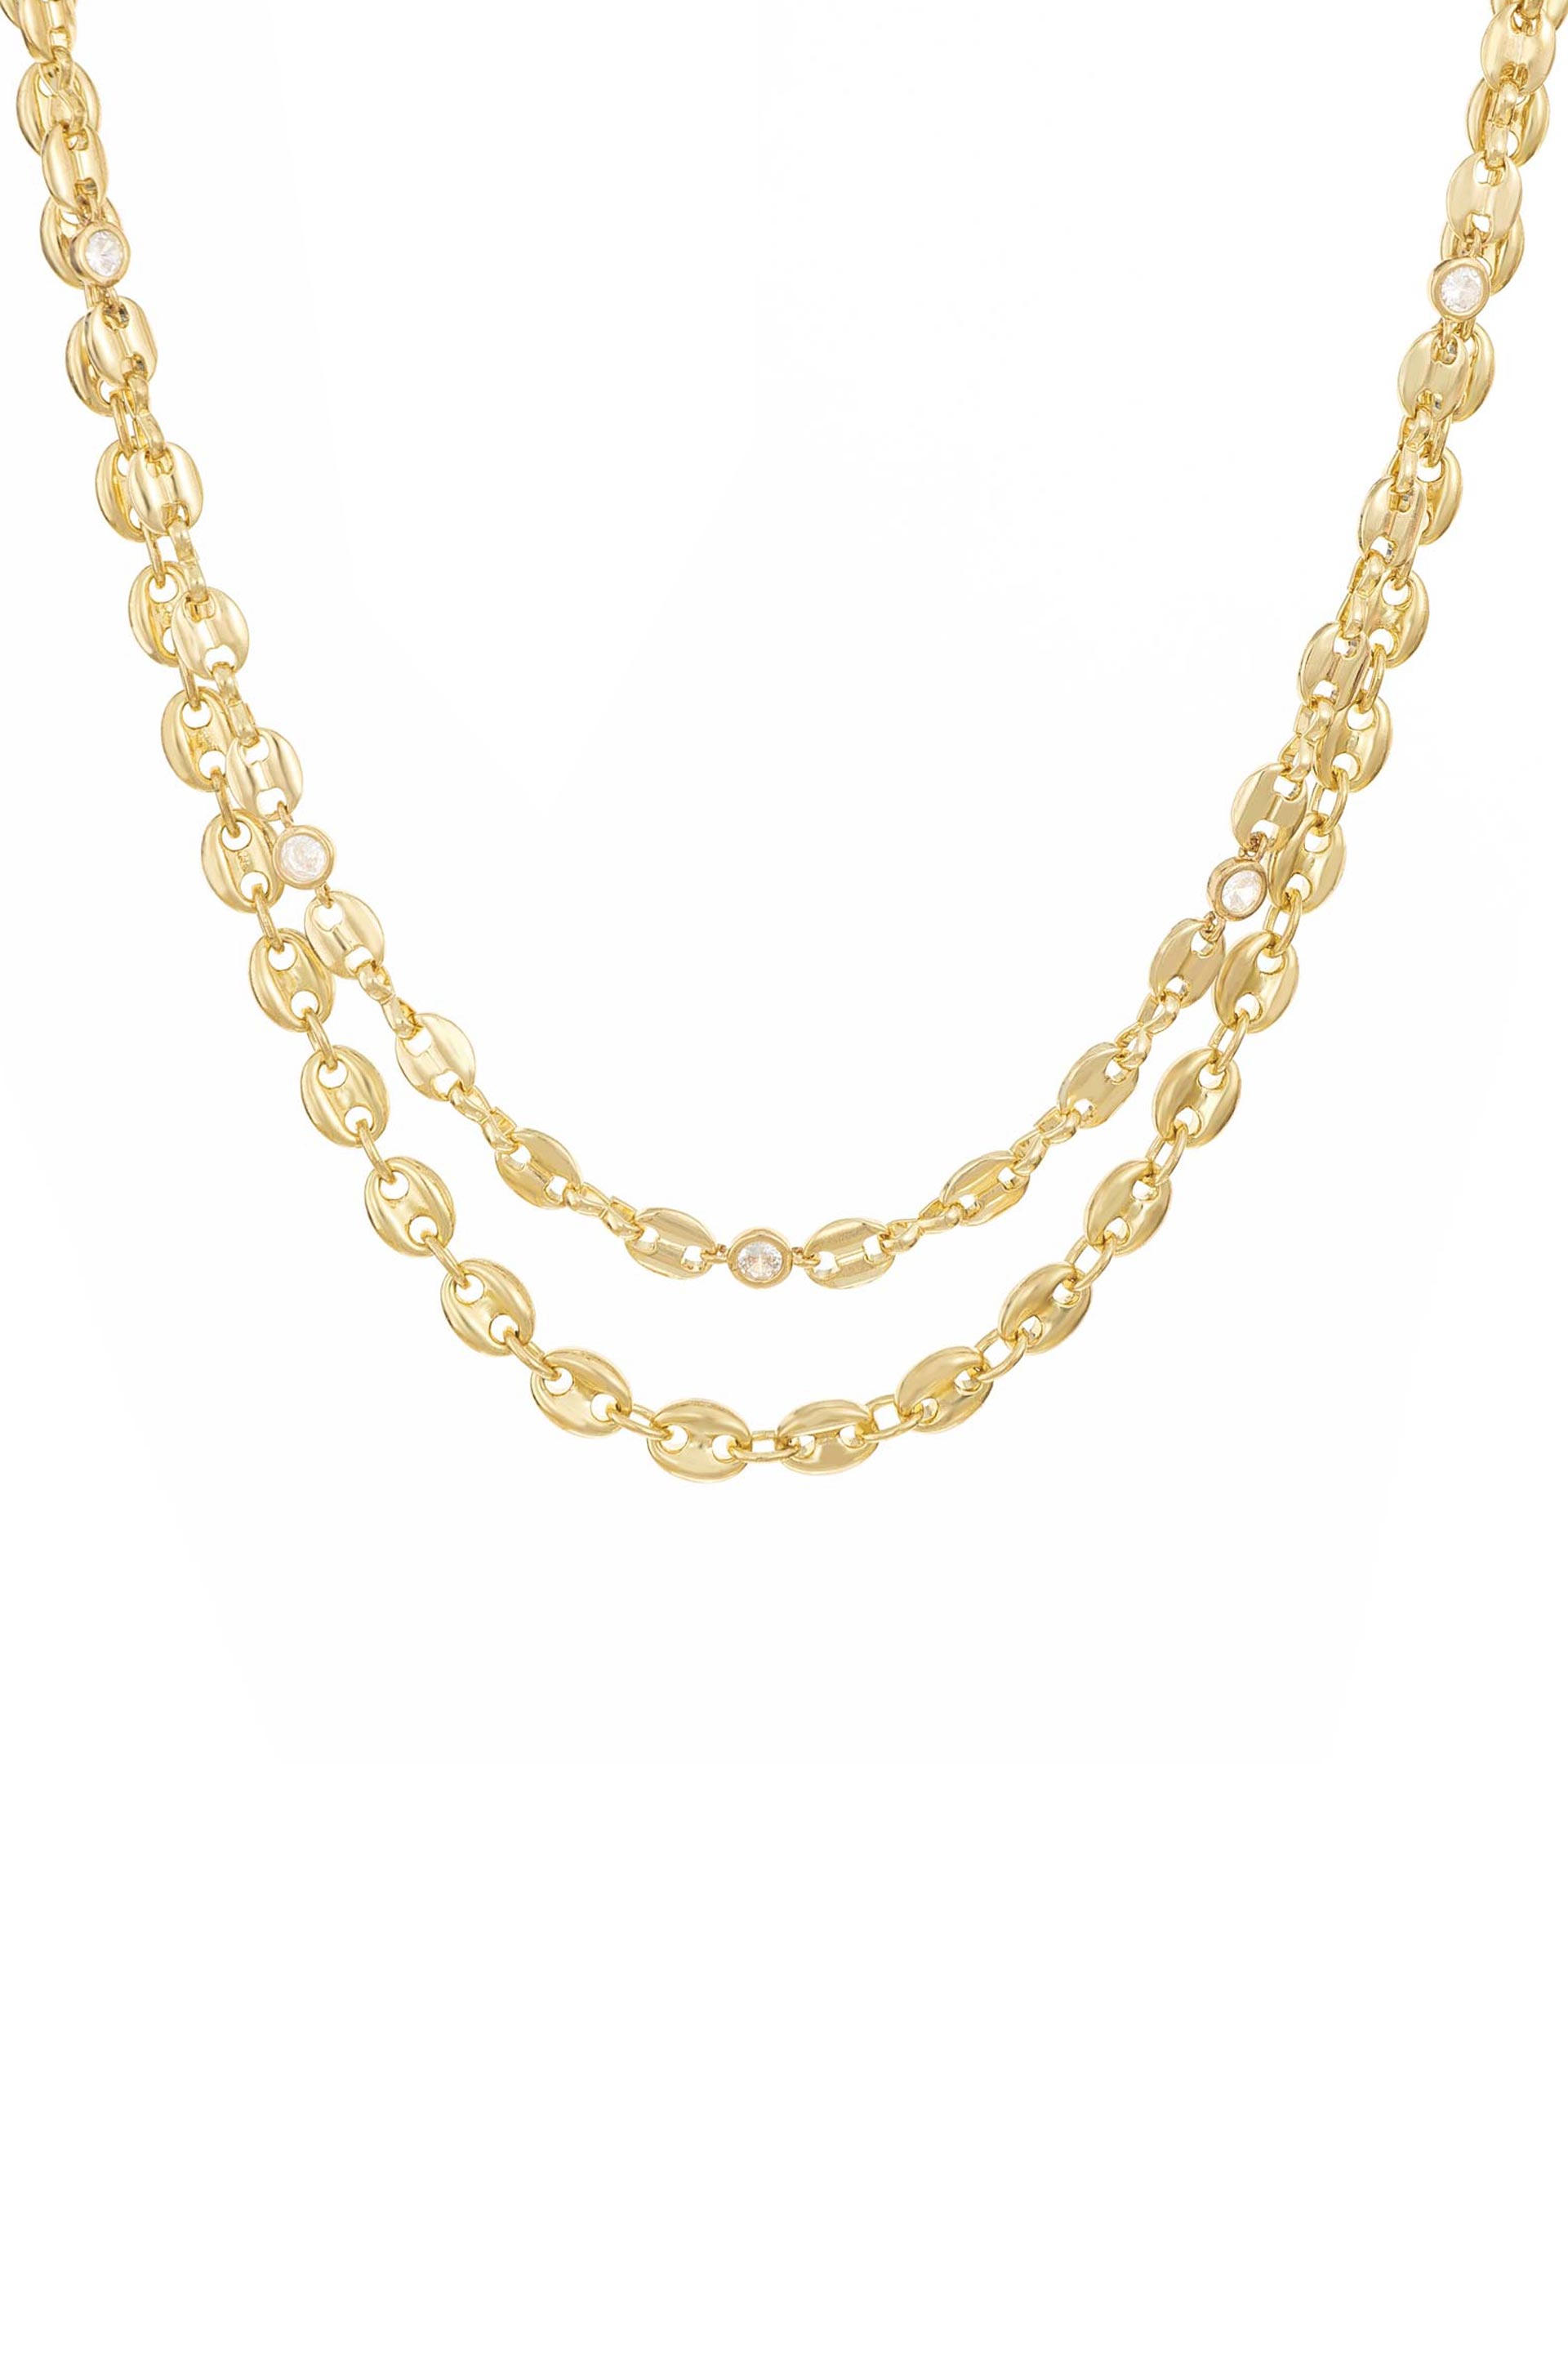 West Coast Sunset 18k Gold Plated Double Chain Necklace on white background